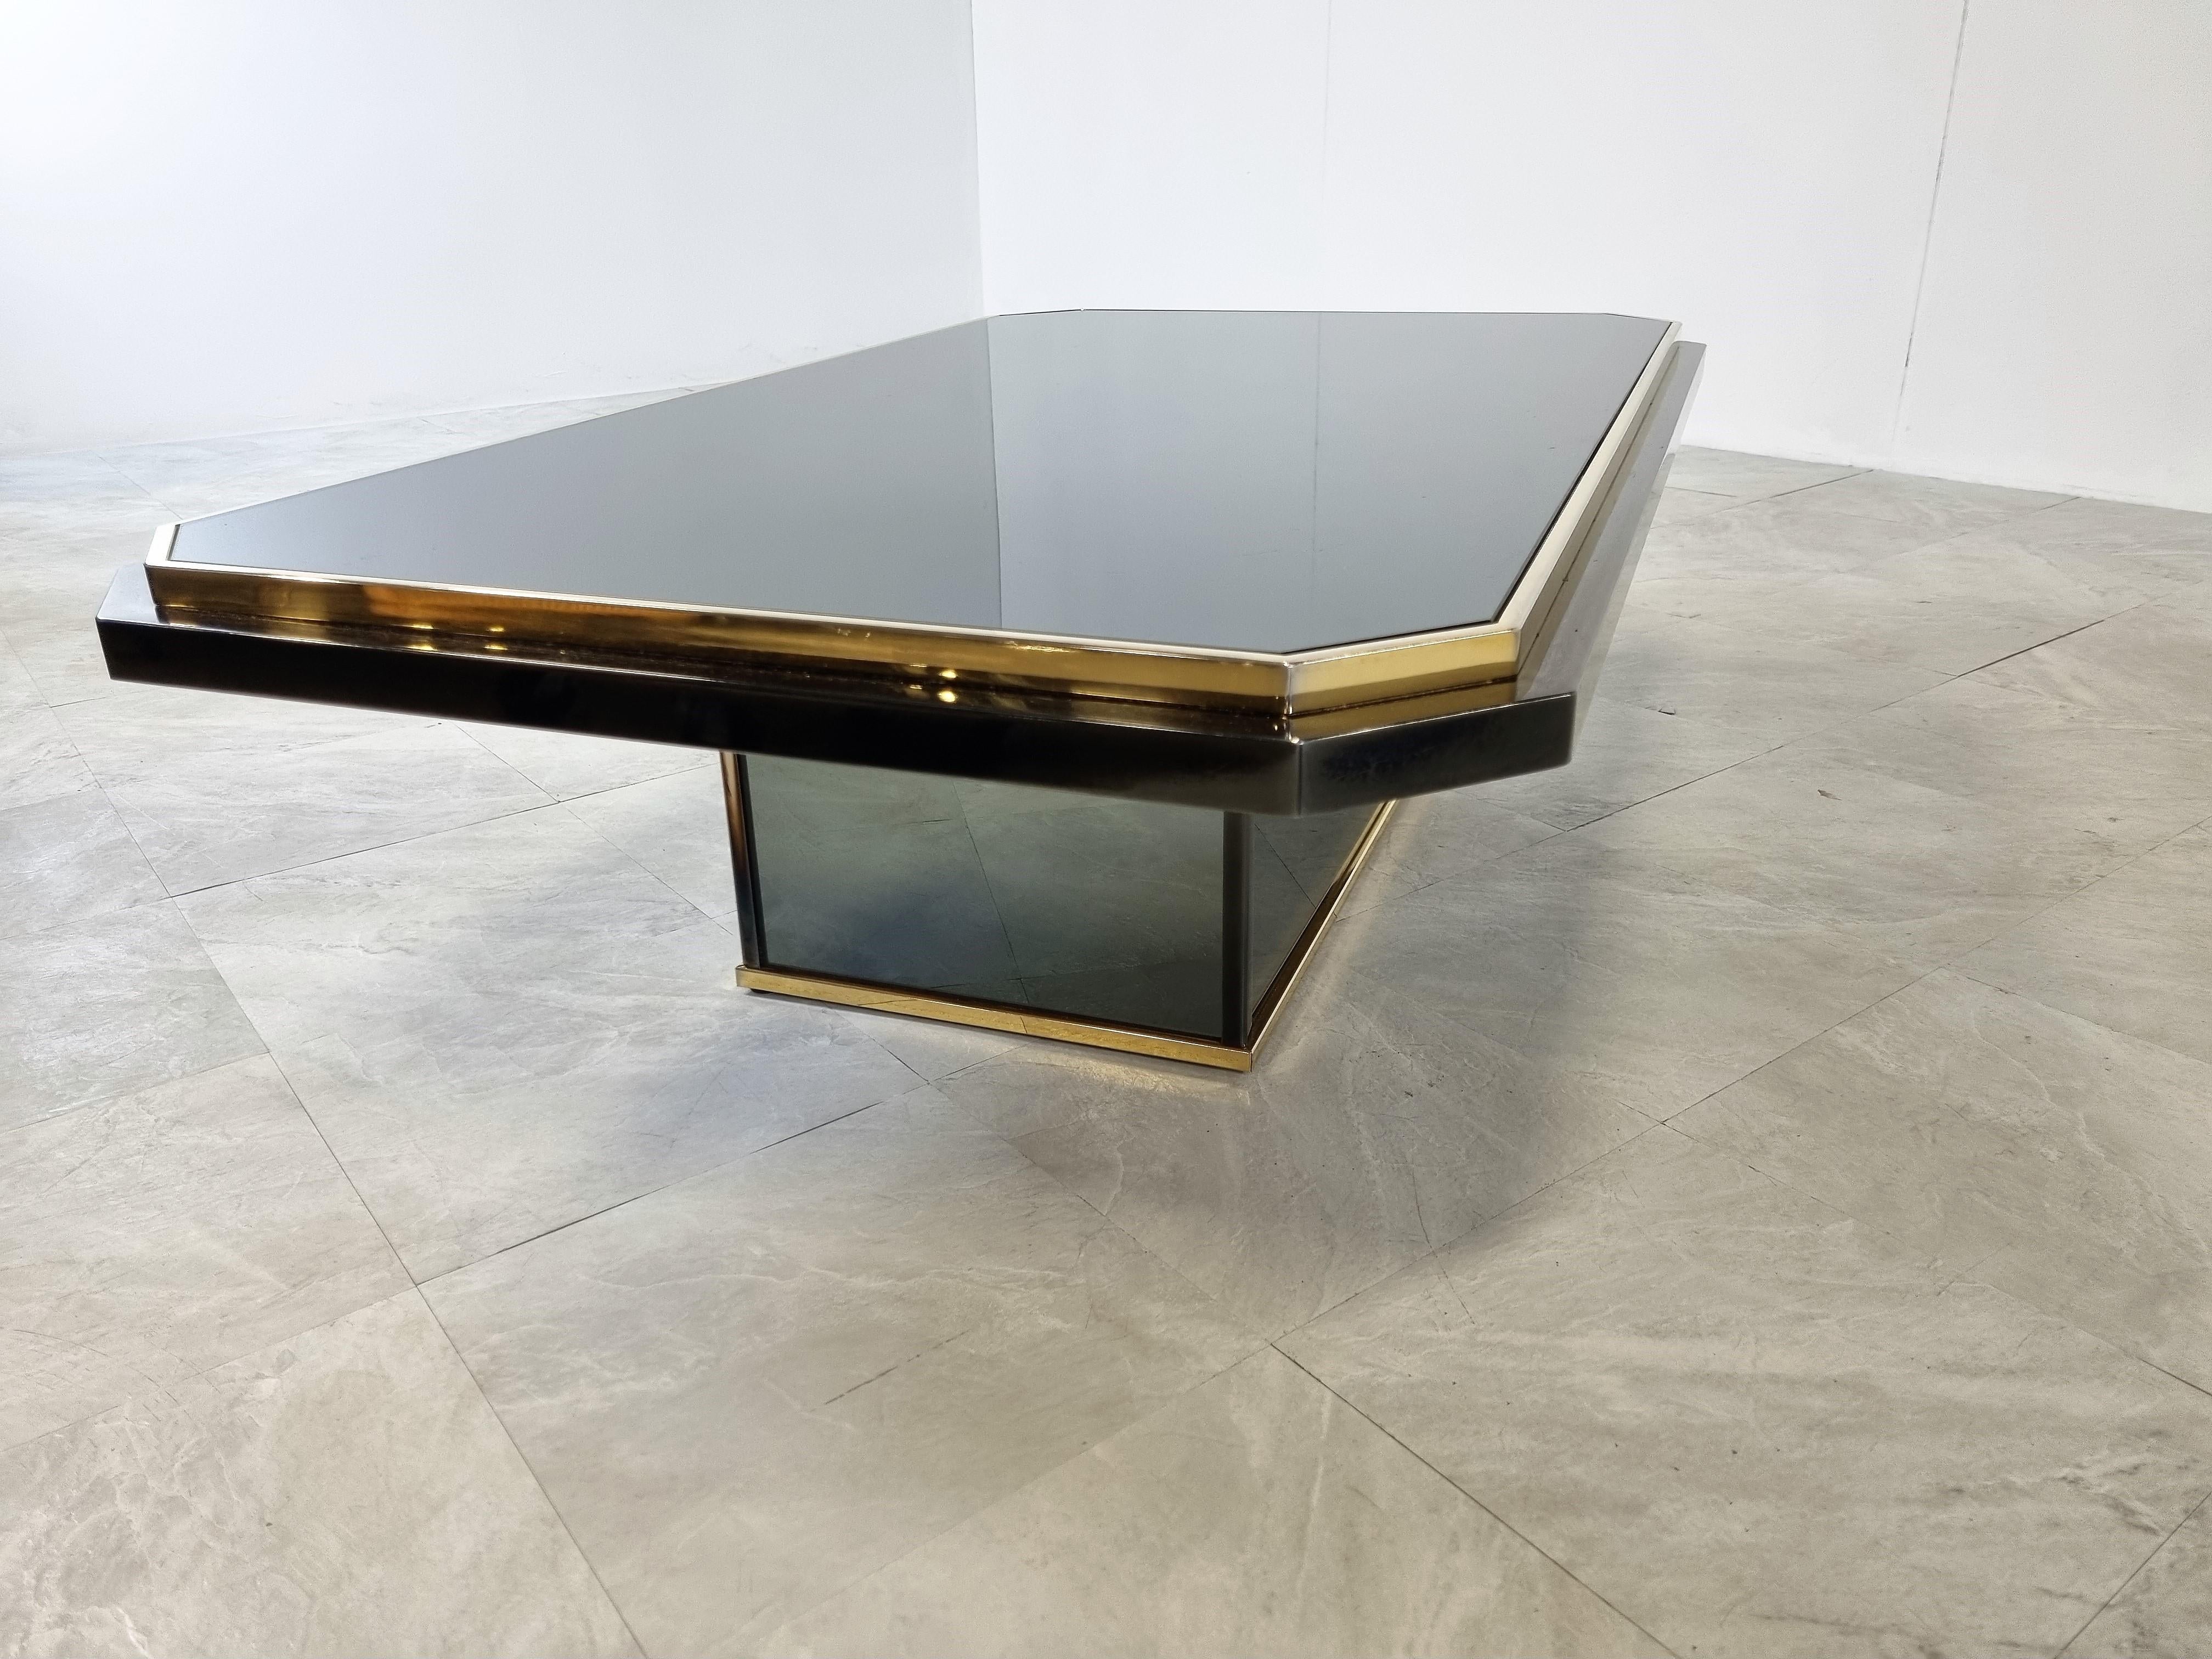 Quality 24kt gold layered, black lacquered metal and mirrored glass coffee table manufactured by Belgochrom.

It also features a mirrored glass base.

Belgochrom produced quality furniture pieces with a luxurious appeal.

Very good